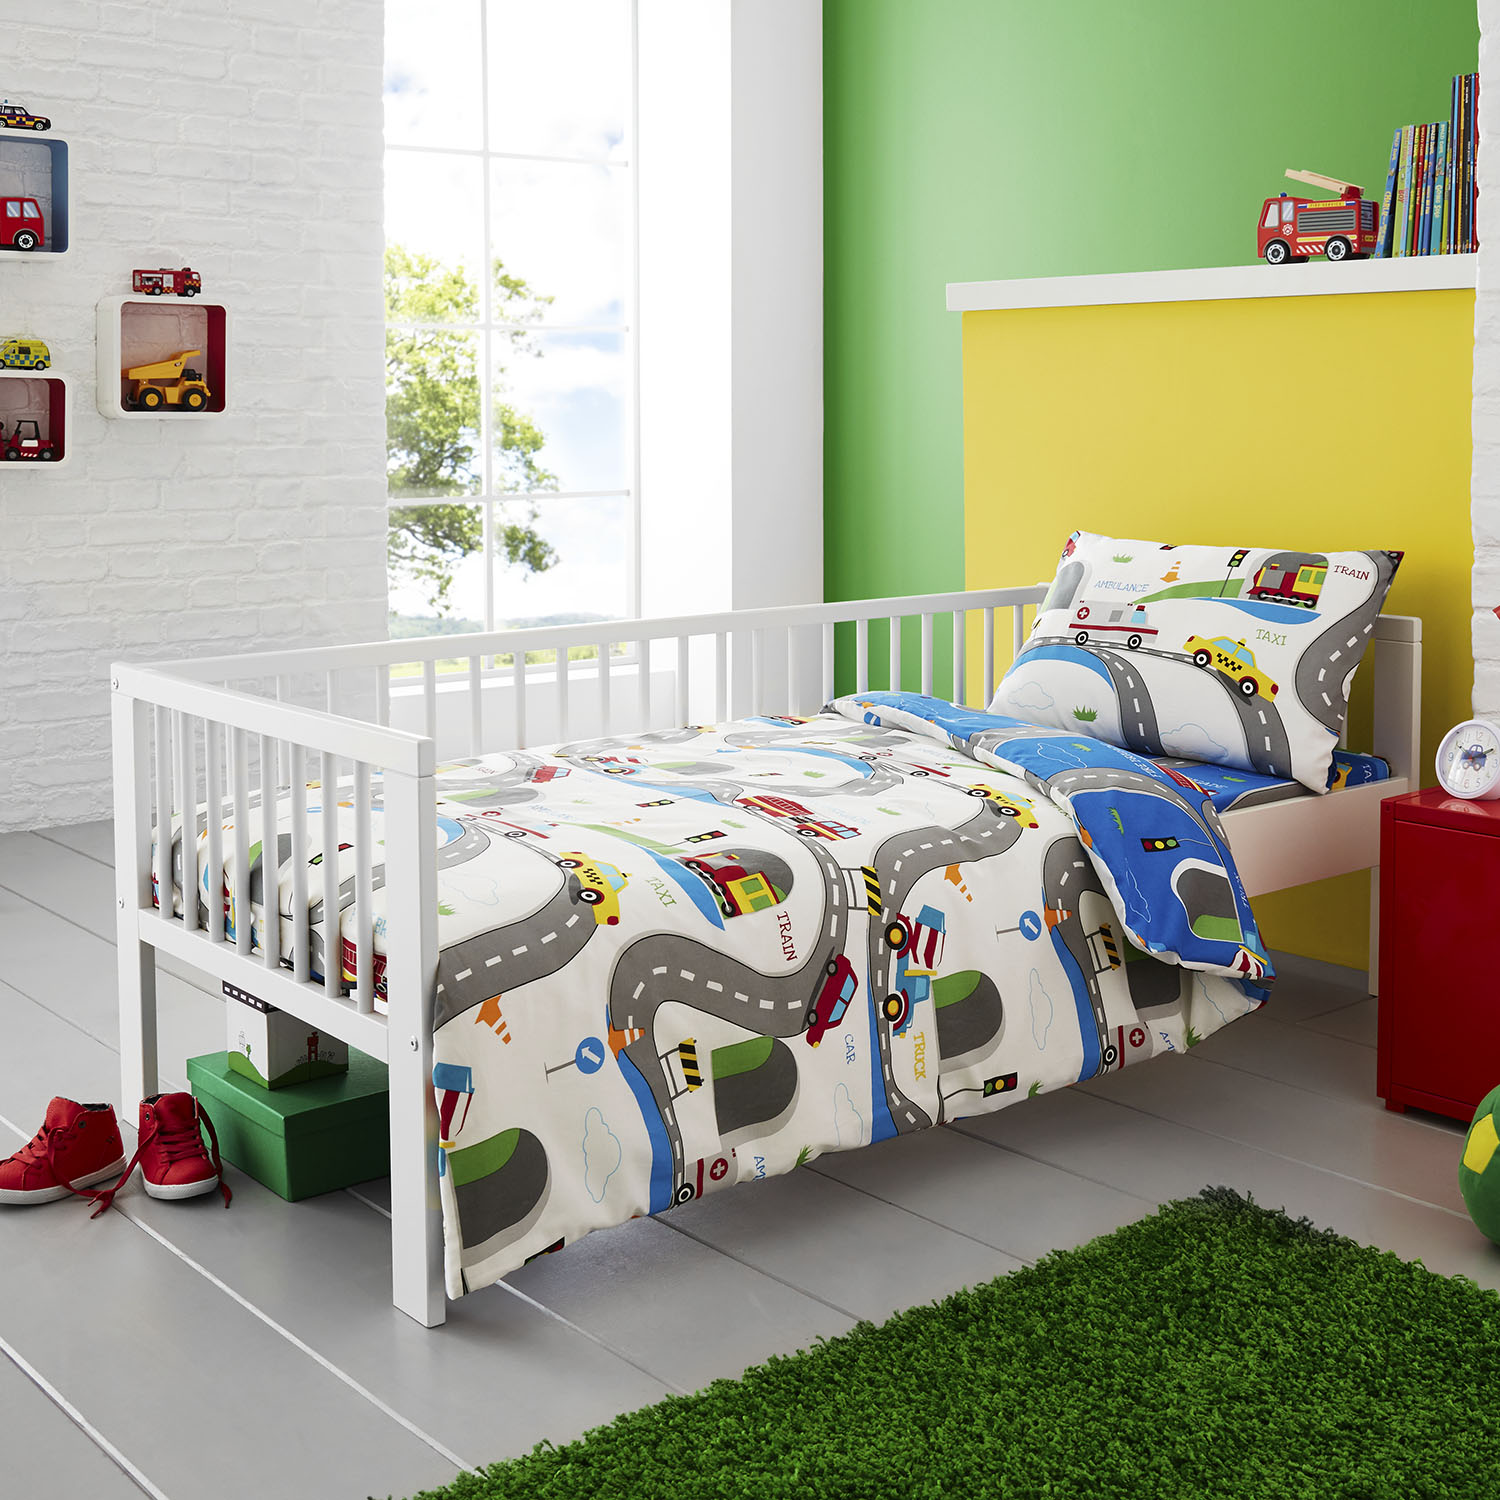 Beep Beep Duvet Cover Home Store More